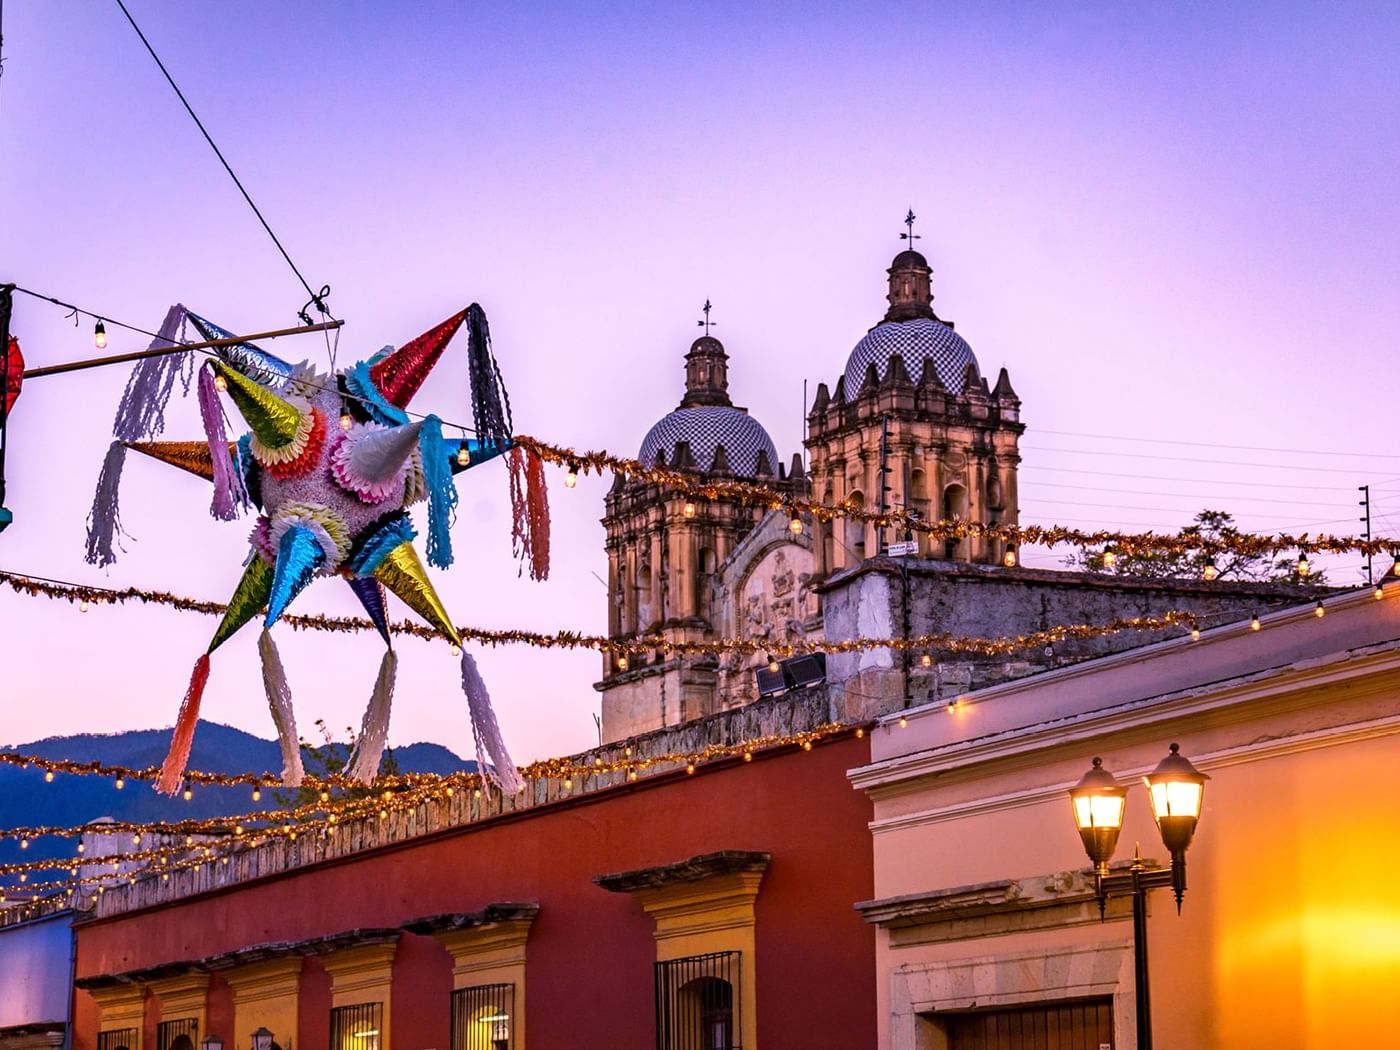 Colorful Pinata traditional fiesta decoration & festive lights over the streets in Atlixco near Gamma Hotels